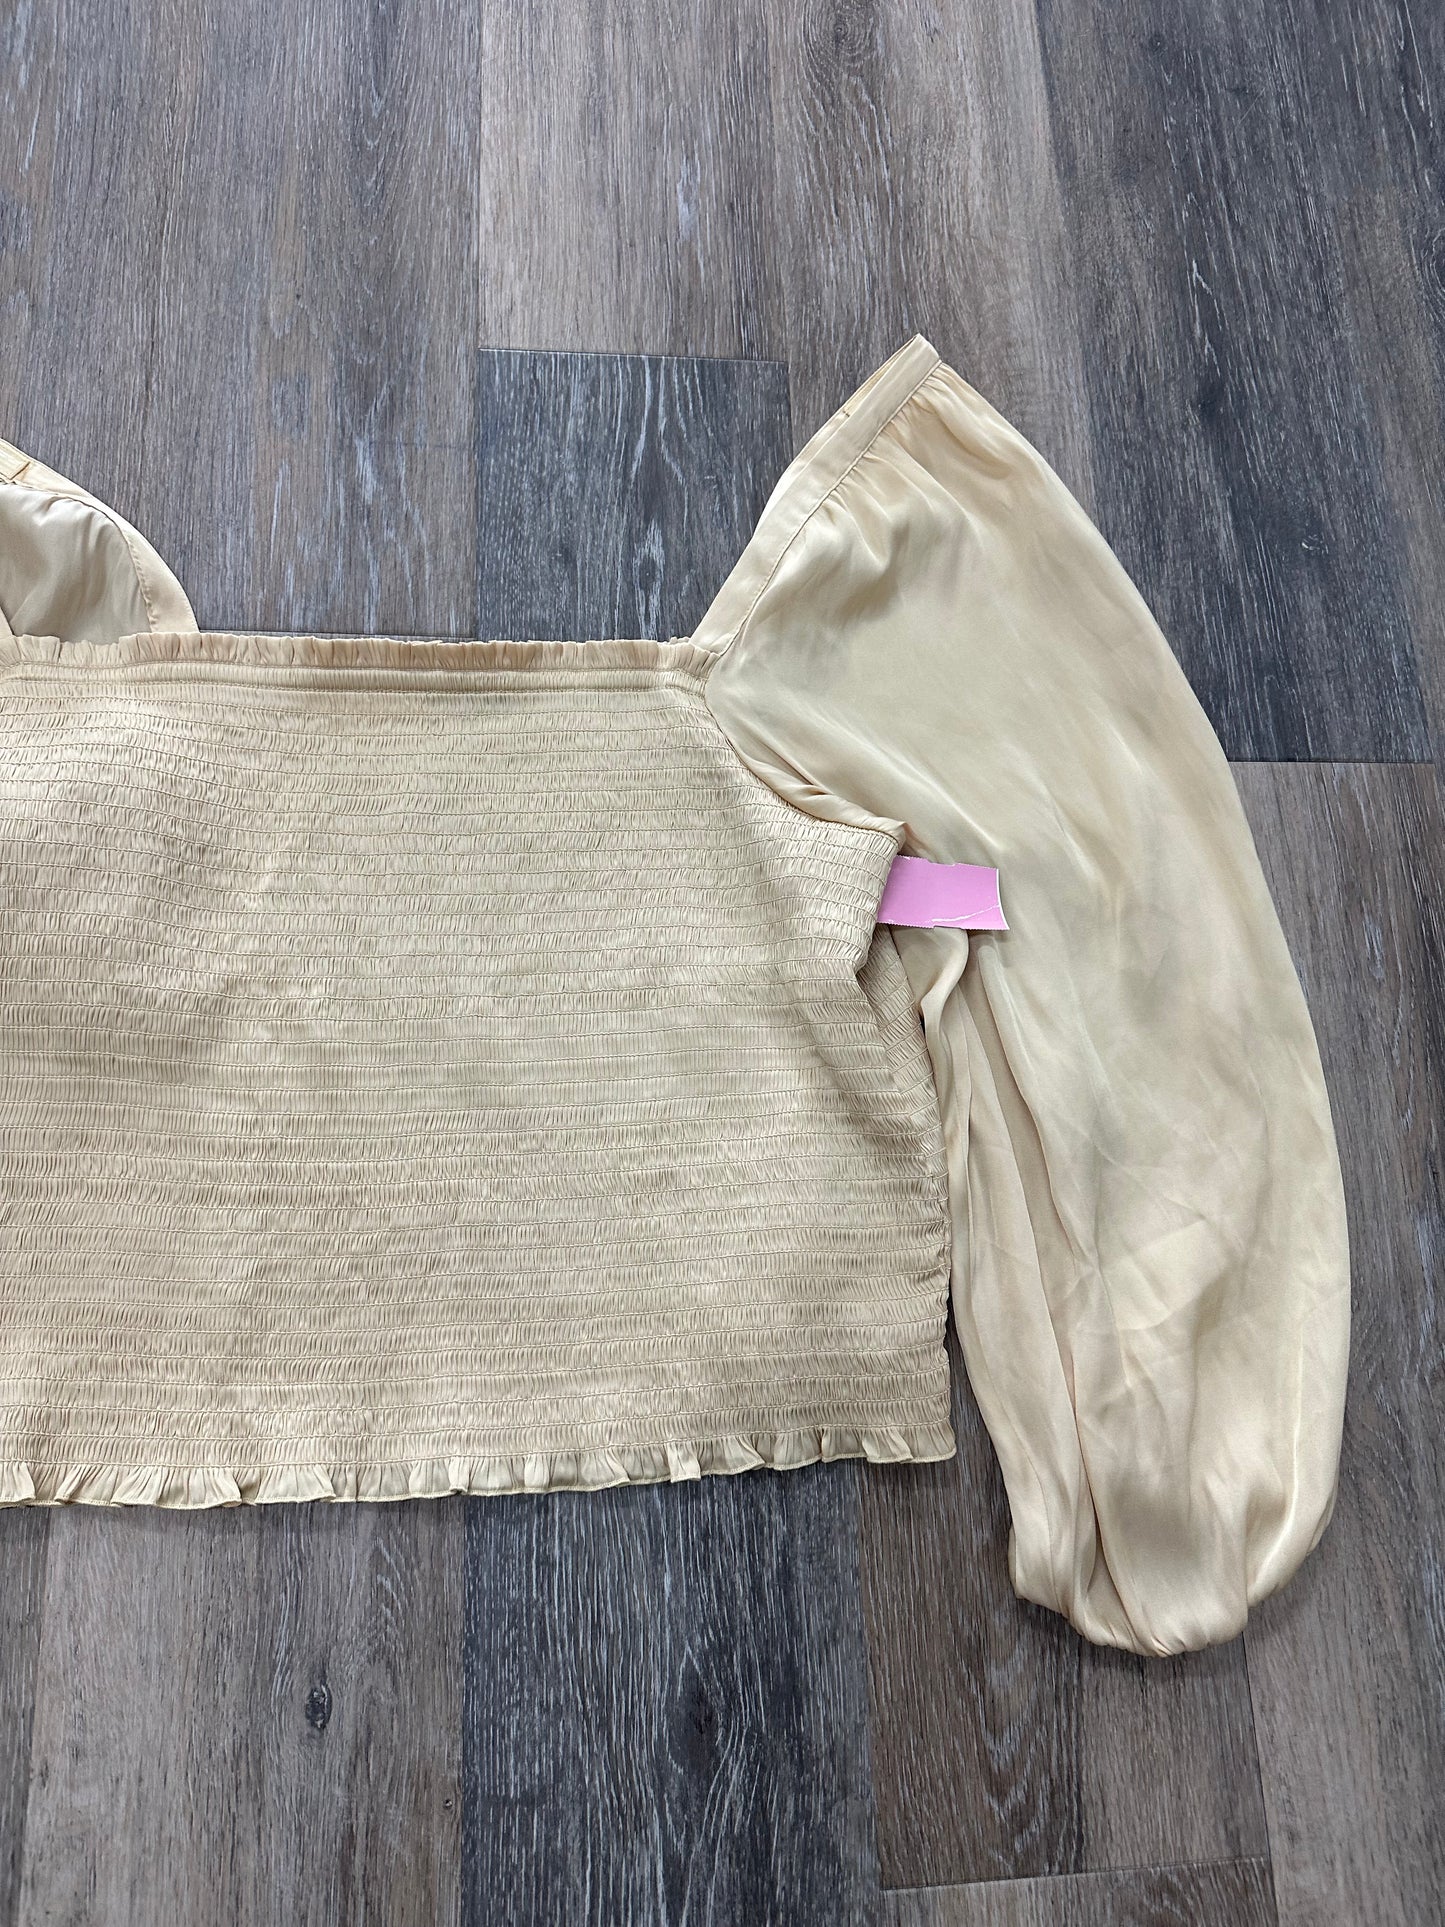 Blouse Long Sleeve By J Crew  Size: 2x